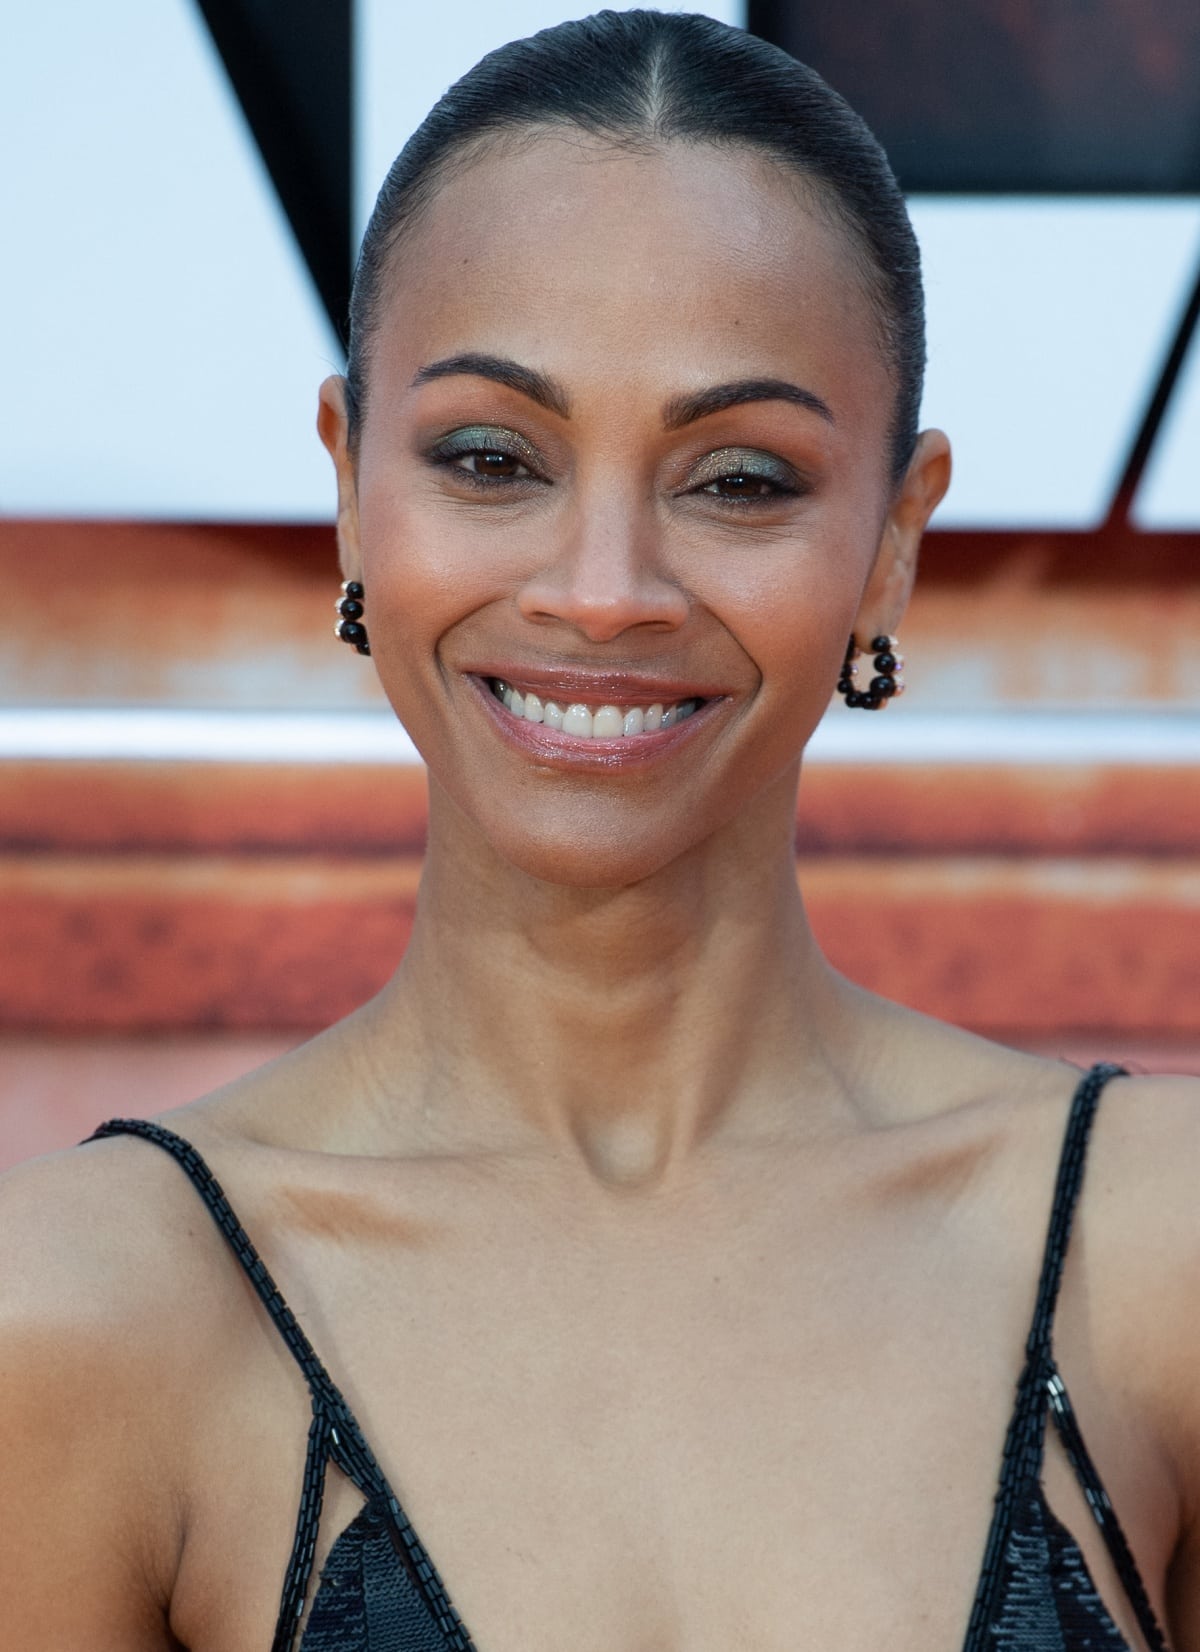 A slicked-back hairstyle, gray-and-green eye makeup, glossy nude lips, and Cartier earrings rounded out Zoe Saldana’s beauty look